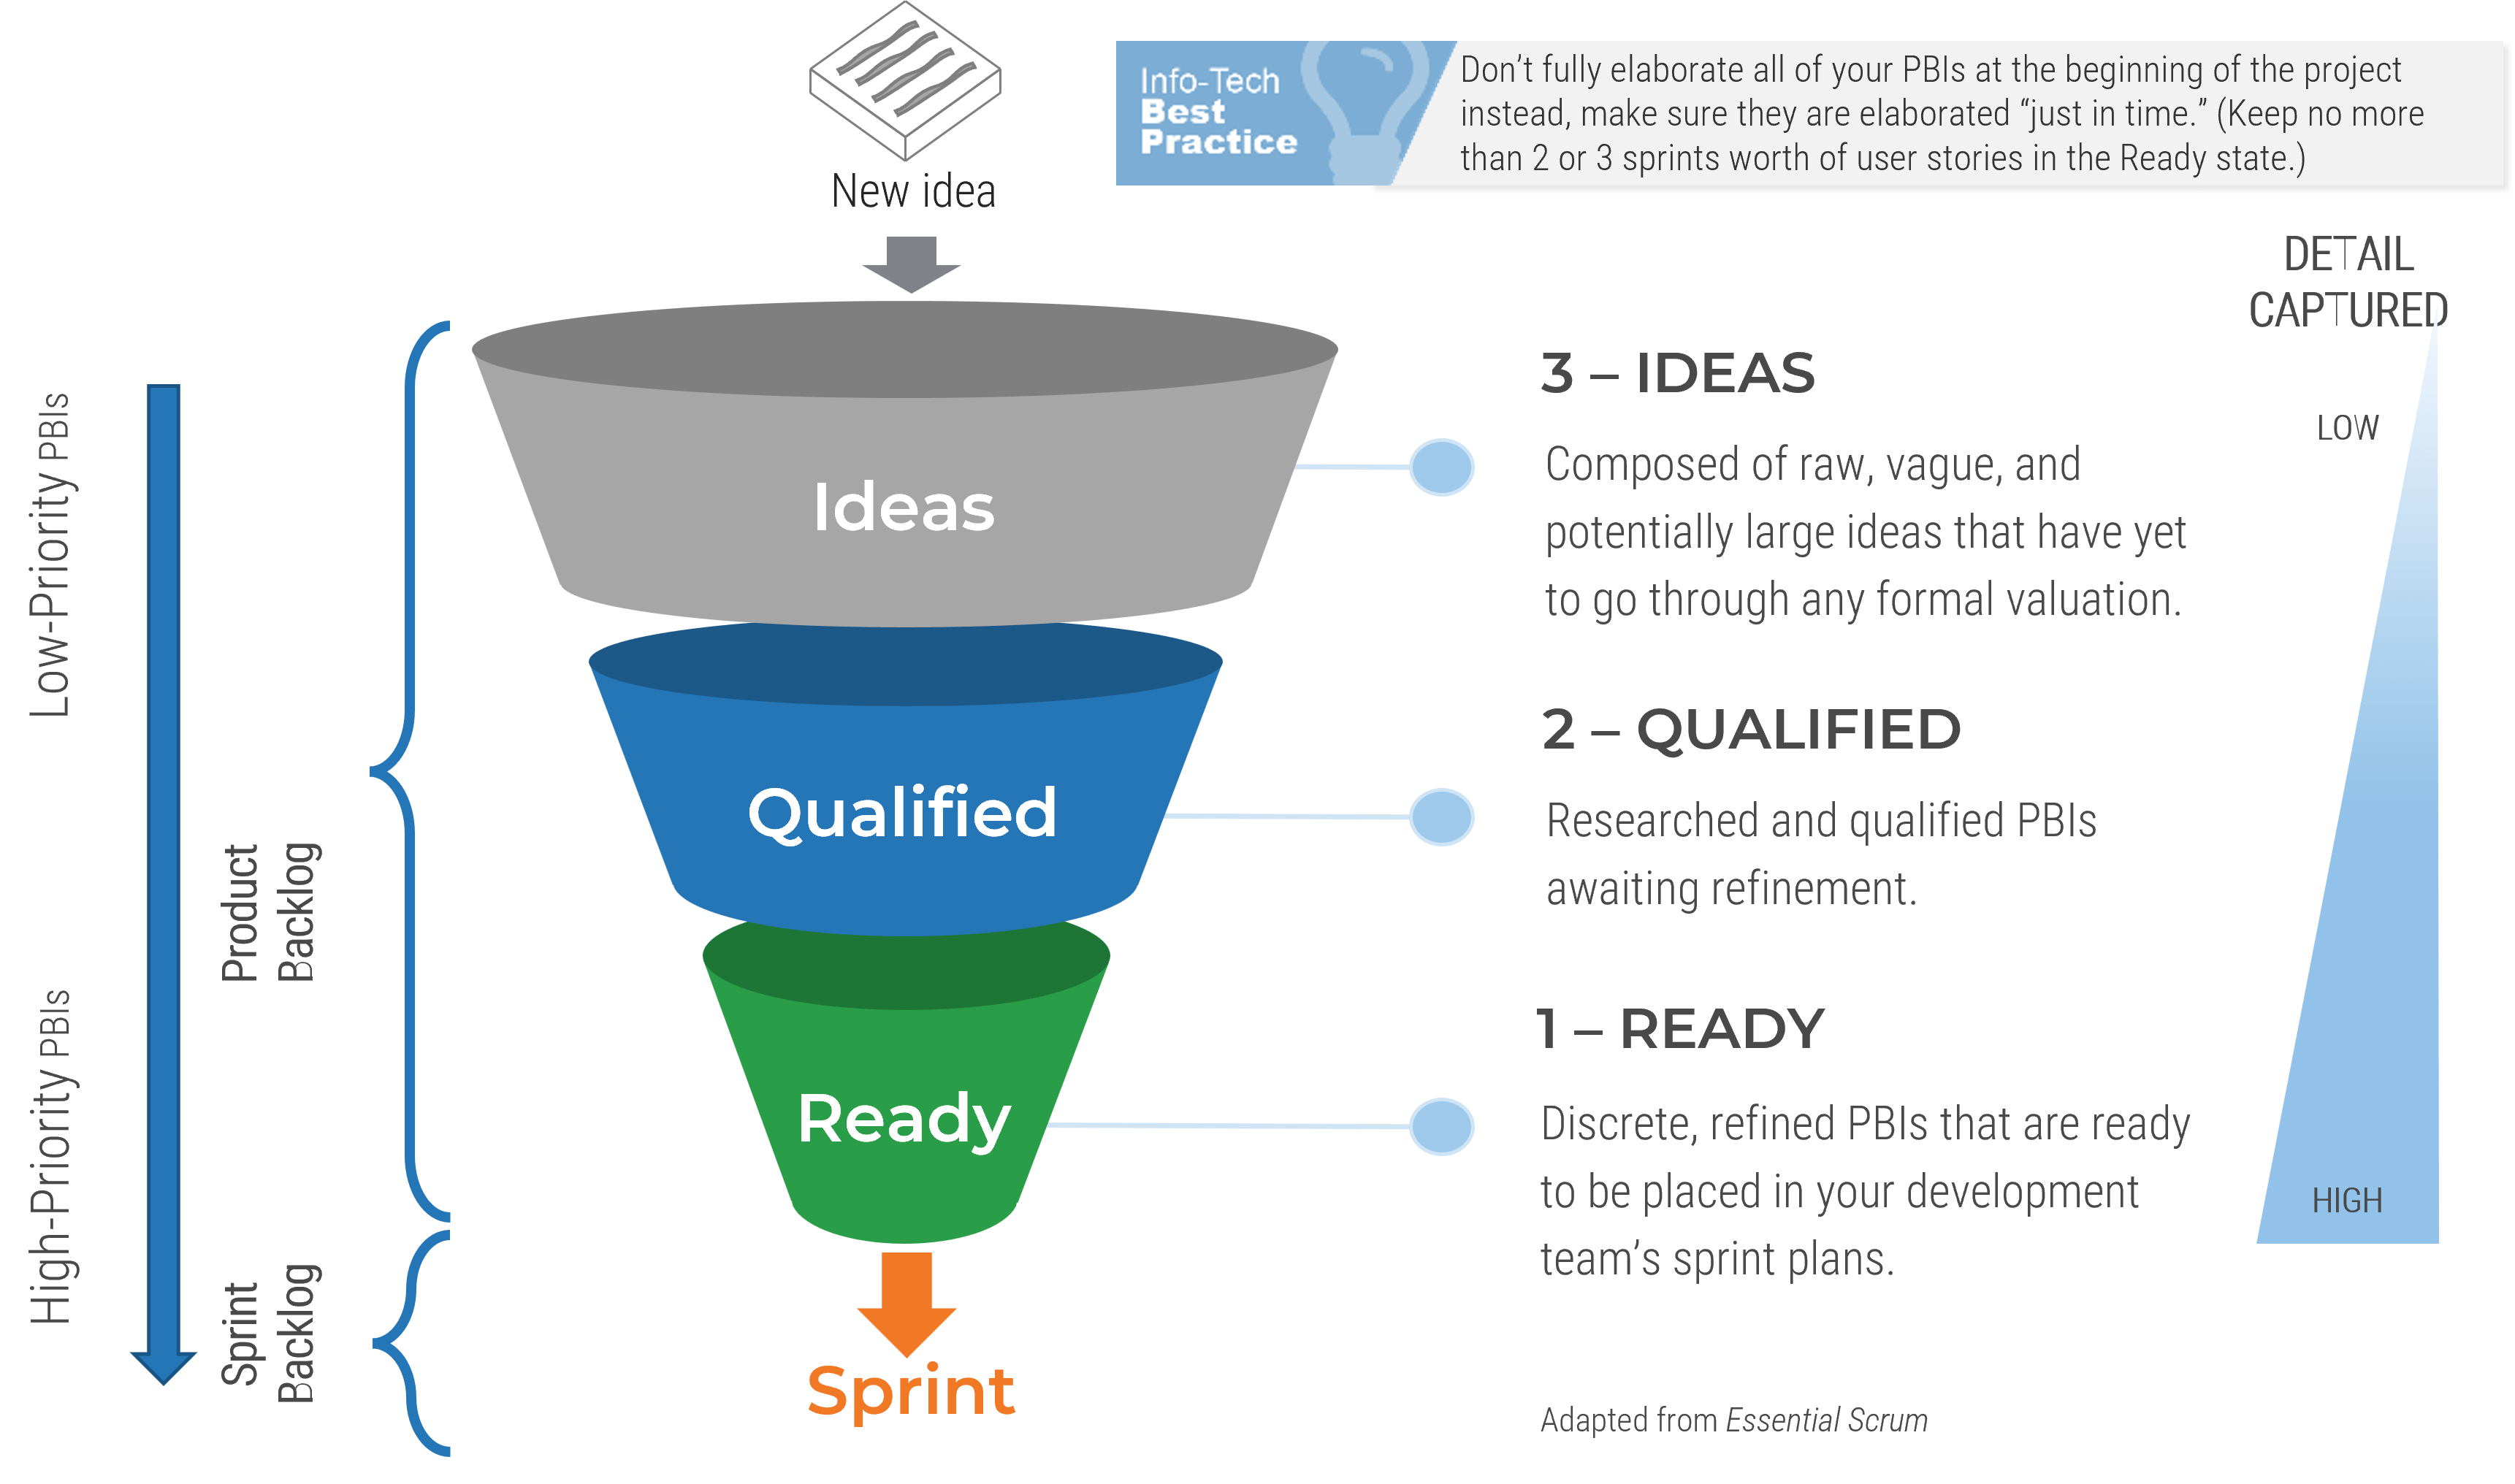 An image showing the Ideas; Qualified; Ready; funnel leading to the sprint aproach.